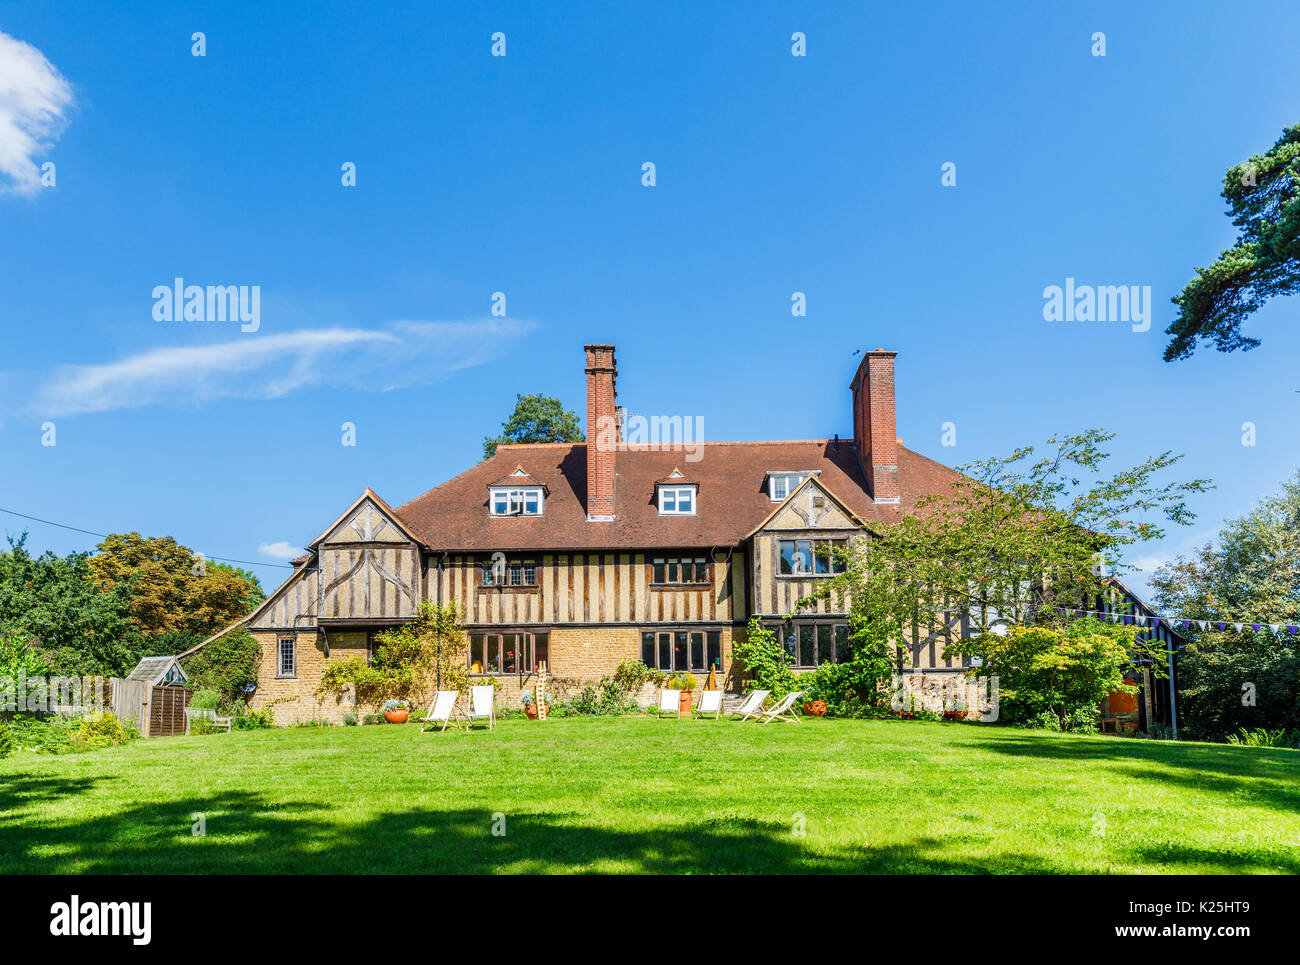 Limnerslease, the Little House, the Arts and Crafts style home of the Watts family, Compton, a village near Guildford, Surrey, south-east England, UK Stock Photo